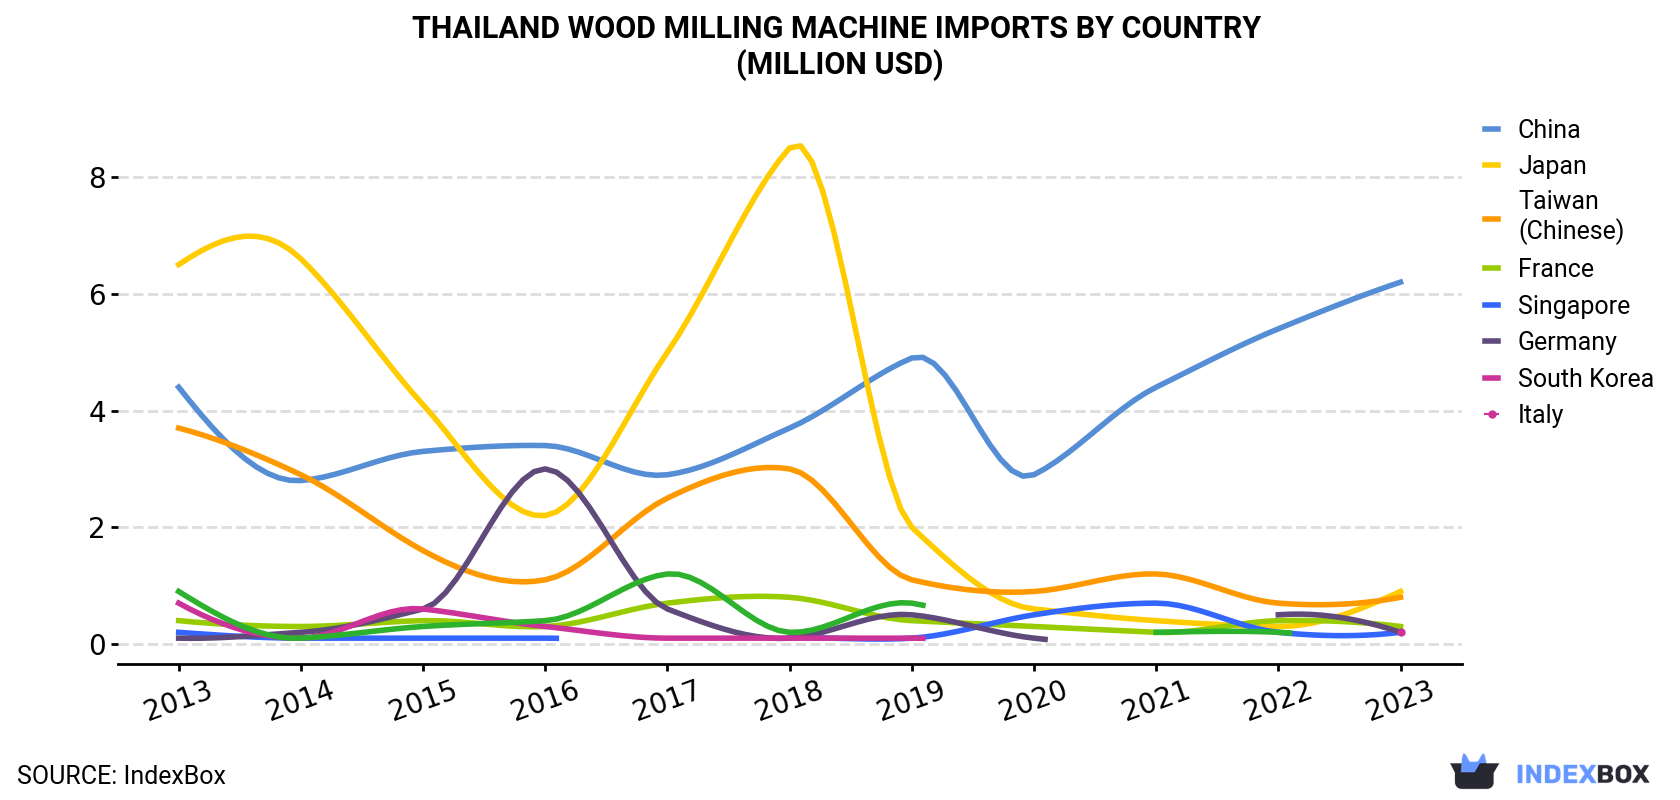 Thailand Wood Milling Machine Imports By Country (Million USD)